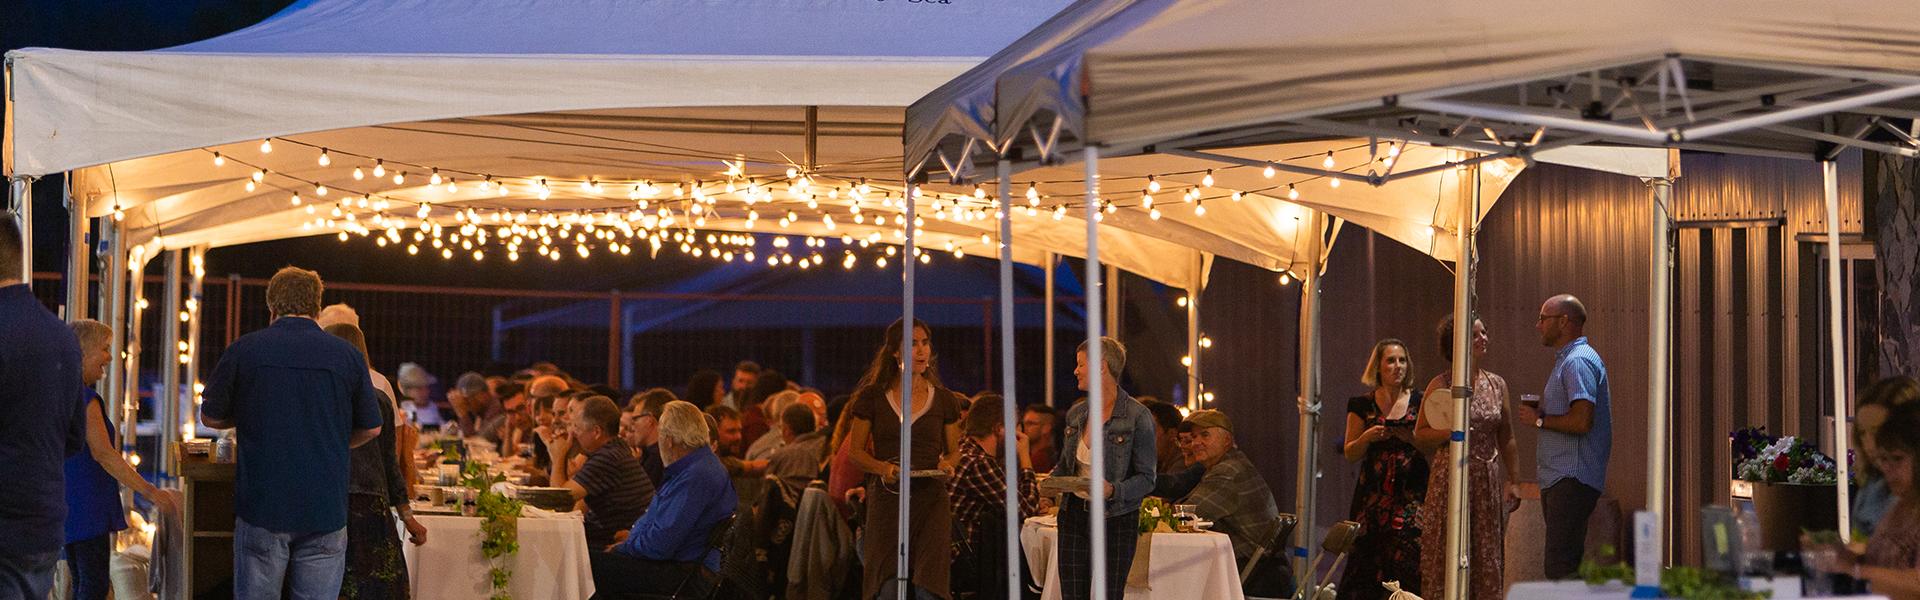 Dinner event under tents and patio lights